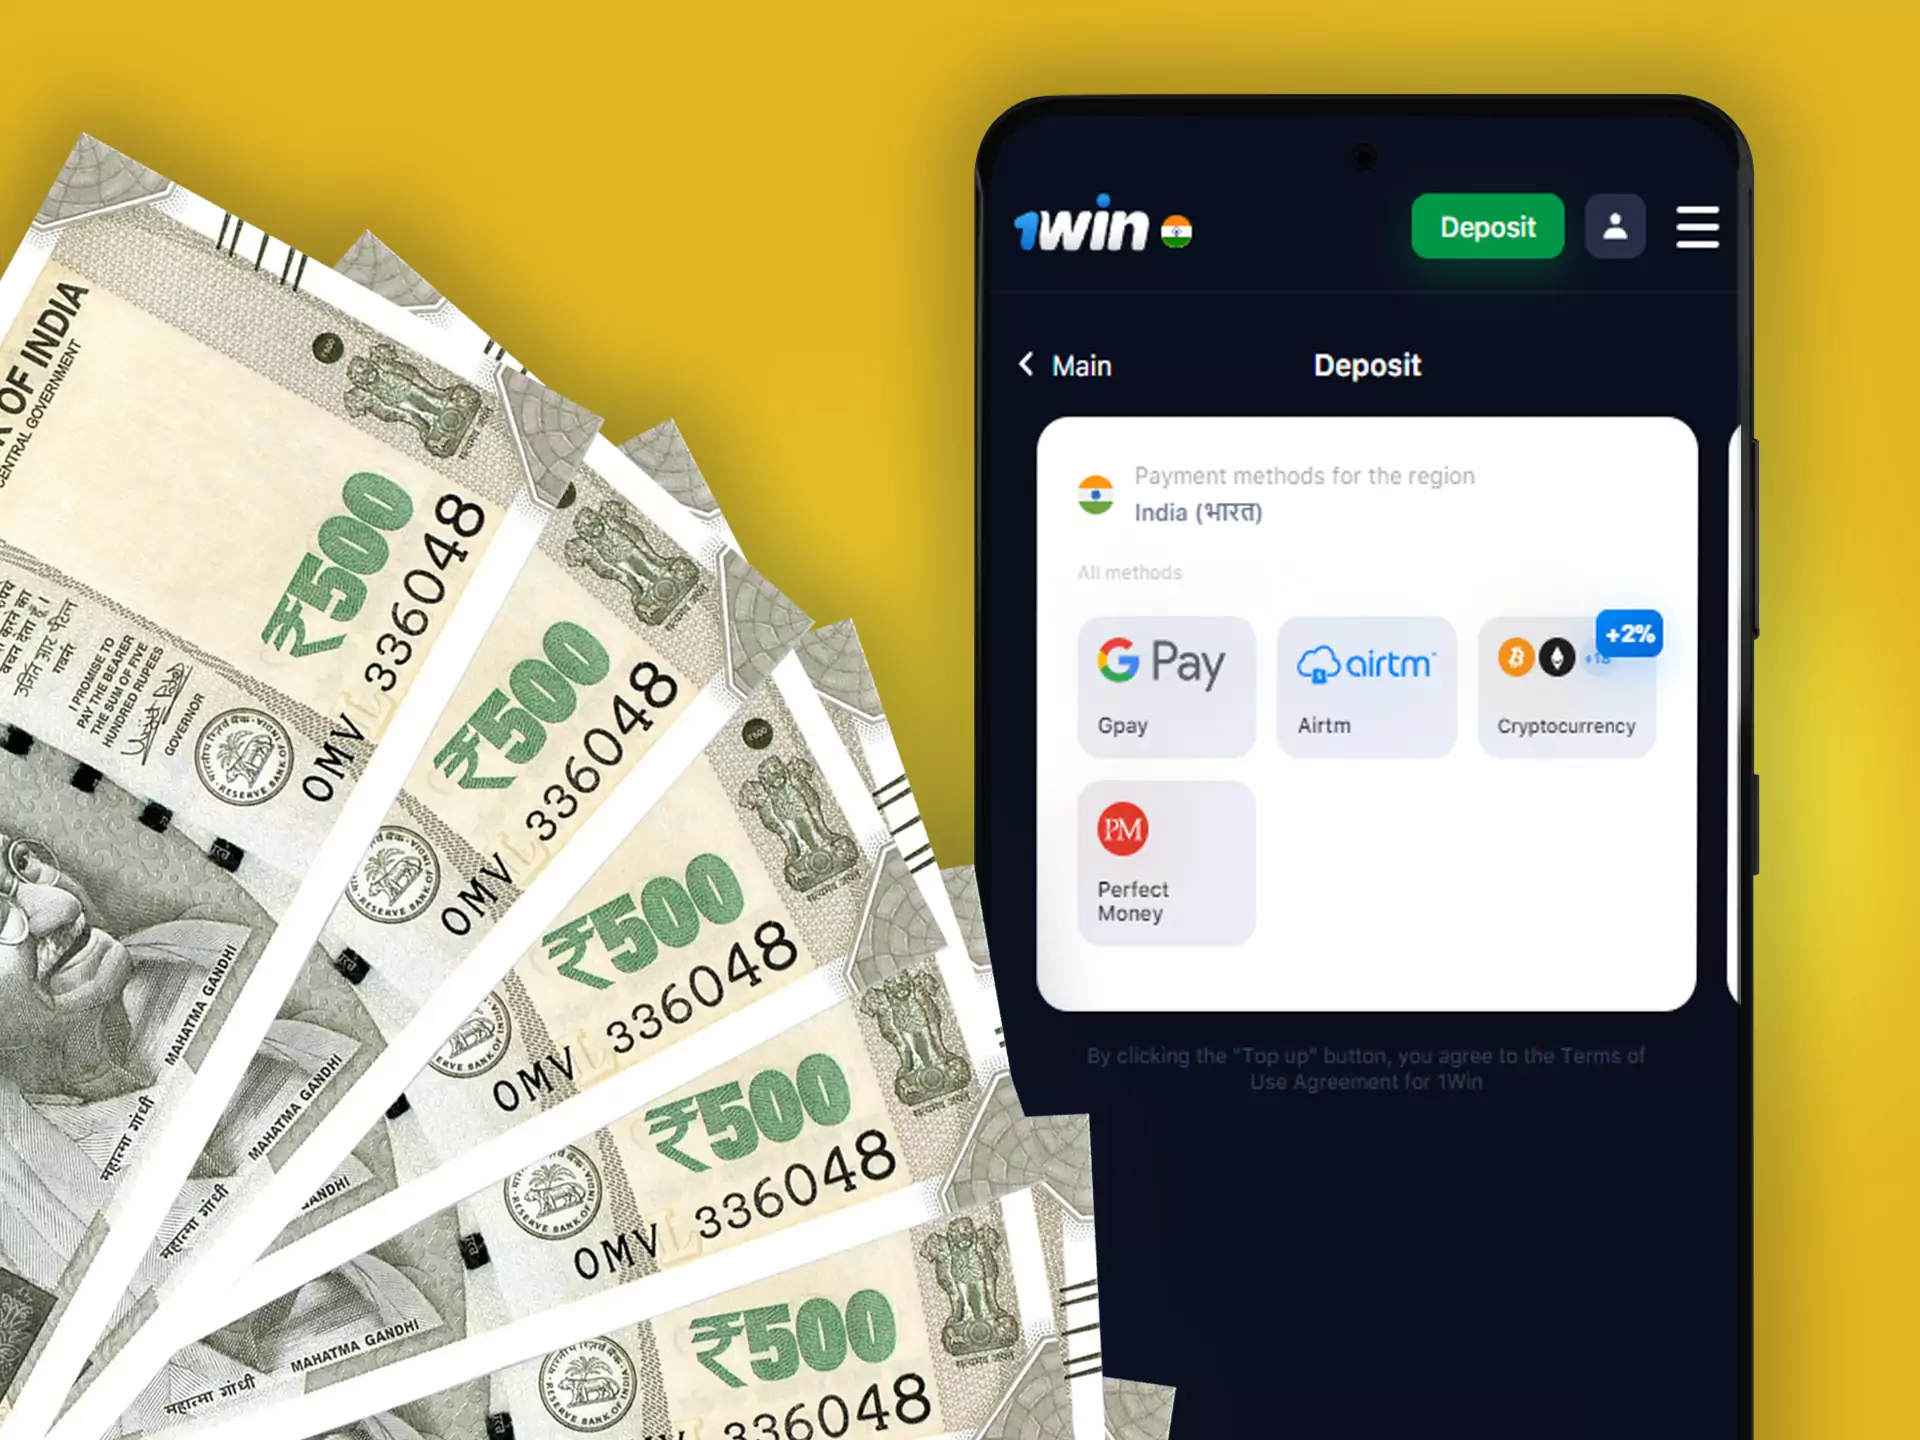 Cricket betting apps support popular deposit and withdrawal methods.